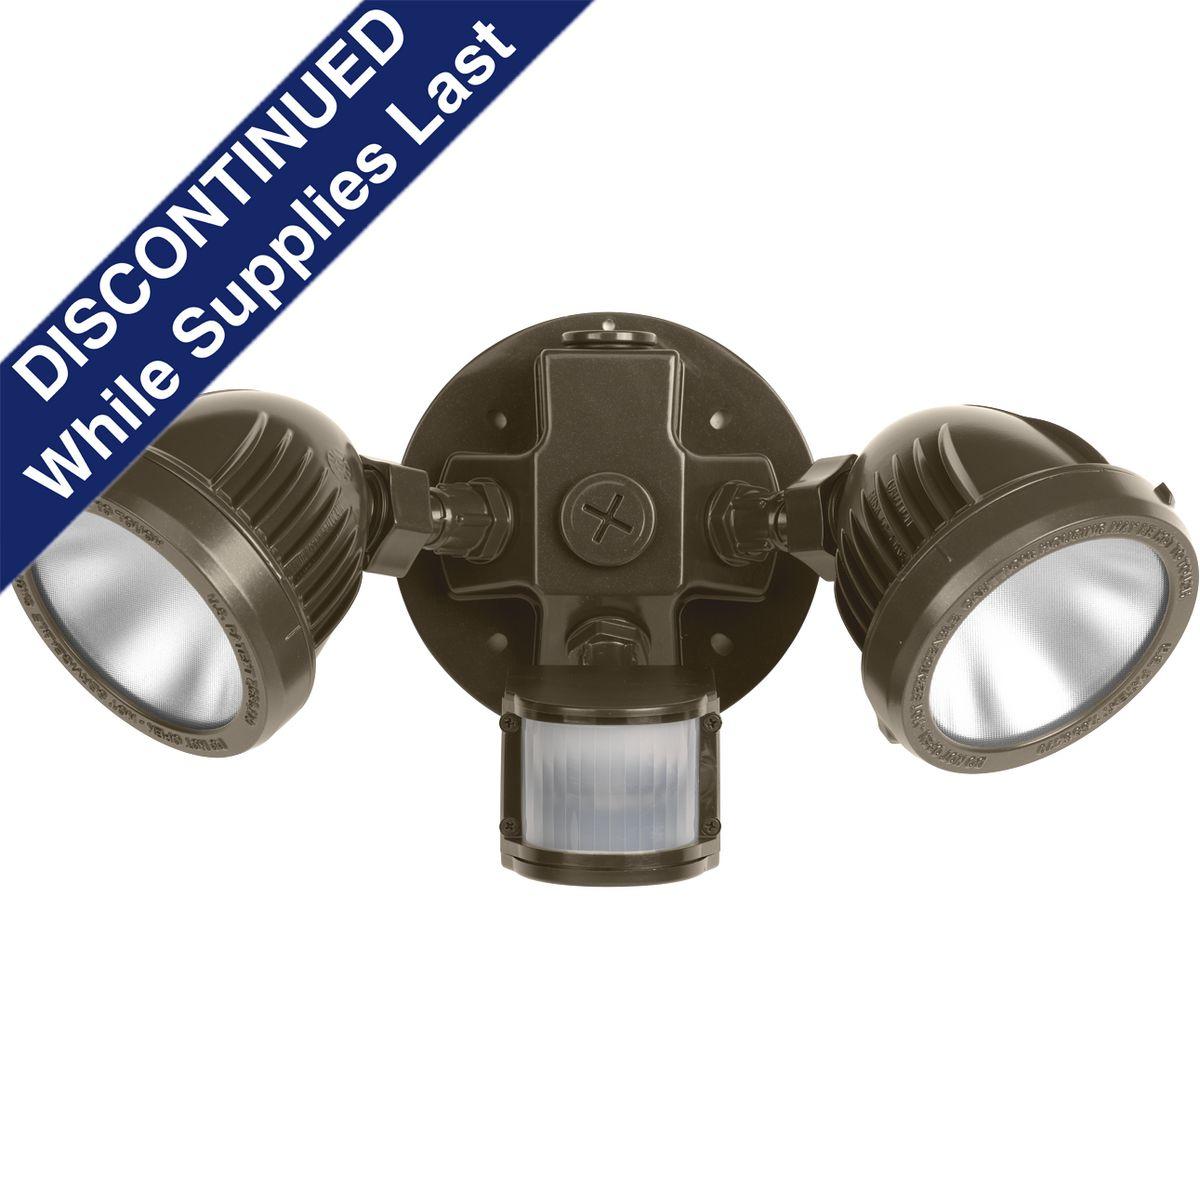 Hubbell P6341-20-30K The two-light Security light with motion sensor is ideal for residential and commercial applications. Each tempered glass head has over 1,000 lumens and is adjustable. The motion sensor has 180 degree coverage, center focus range to 72 feet, Time On, Sens